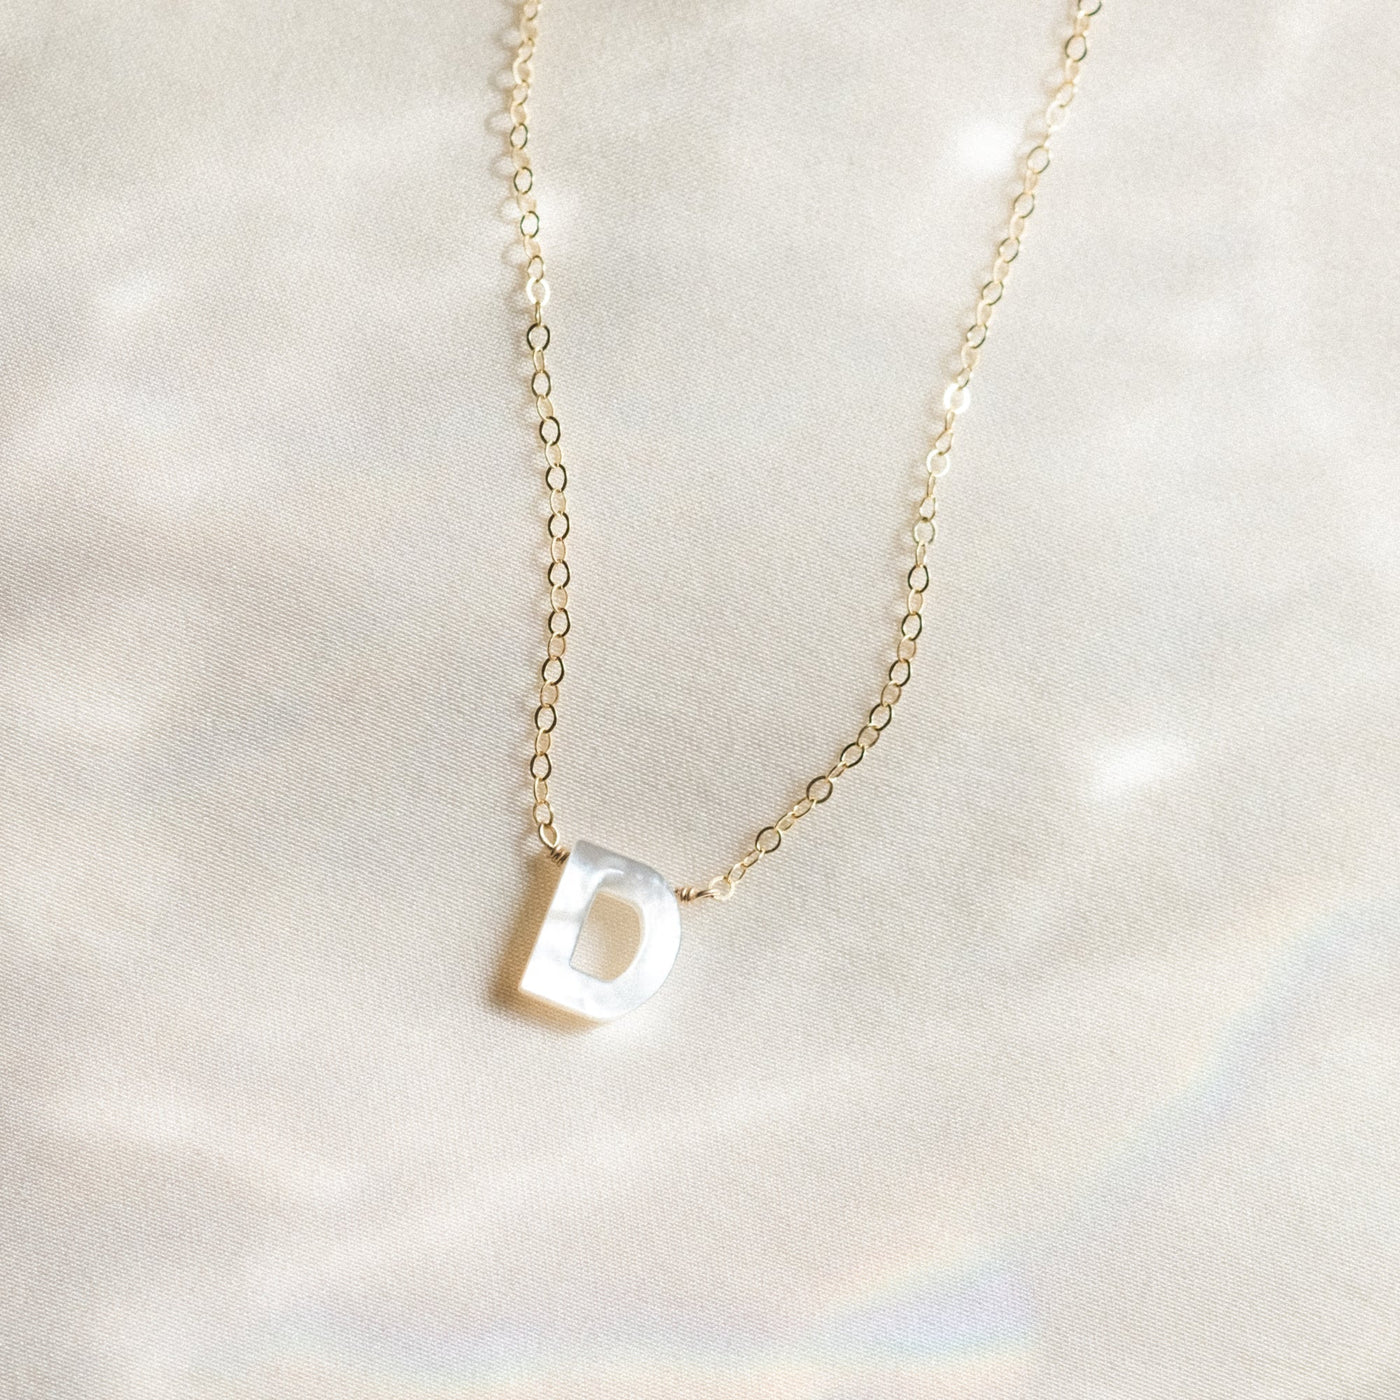 A B C D E F G H I J K L M N O P Q R S T U V W X Y Z Pearl Initial Necklace